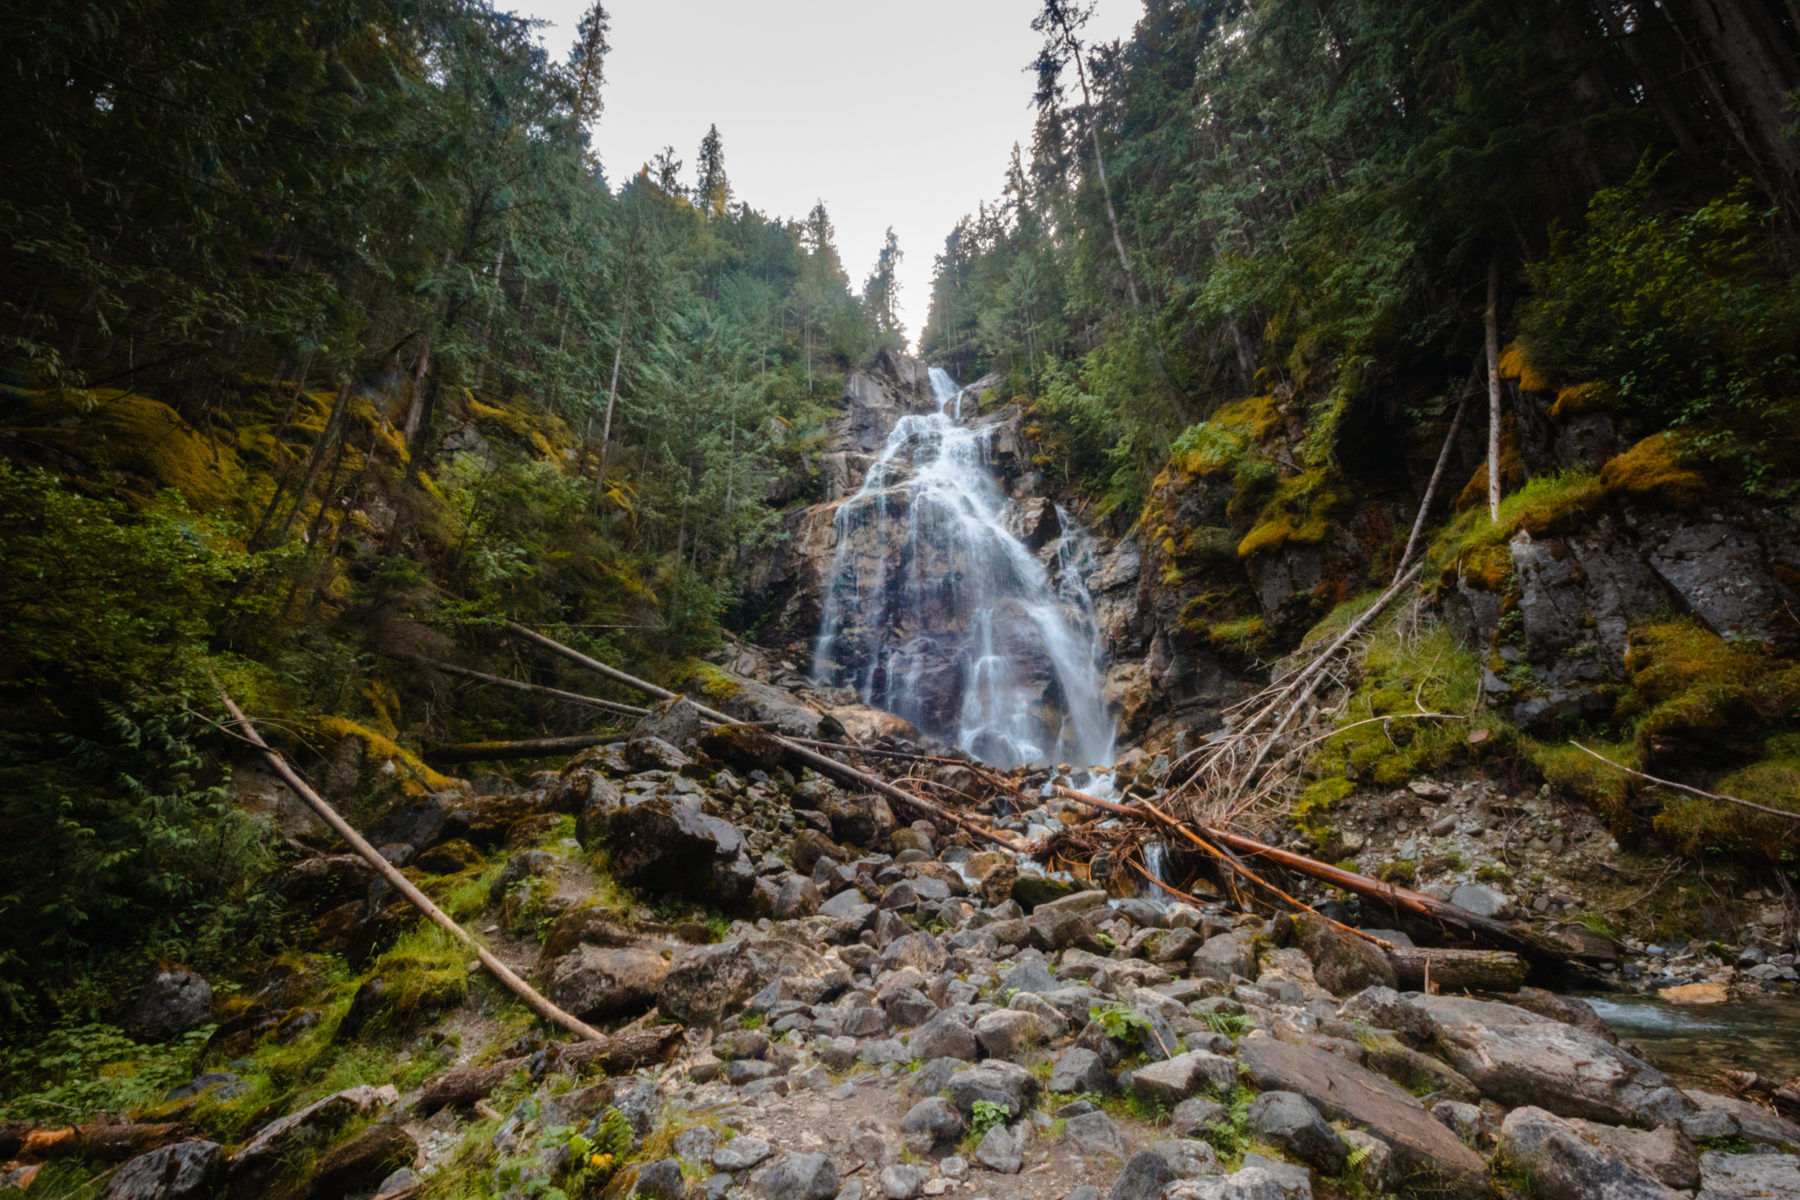 Large, cascading waterfall in the forest